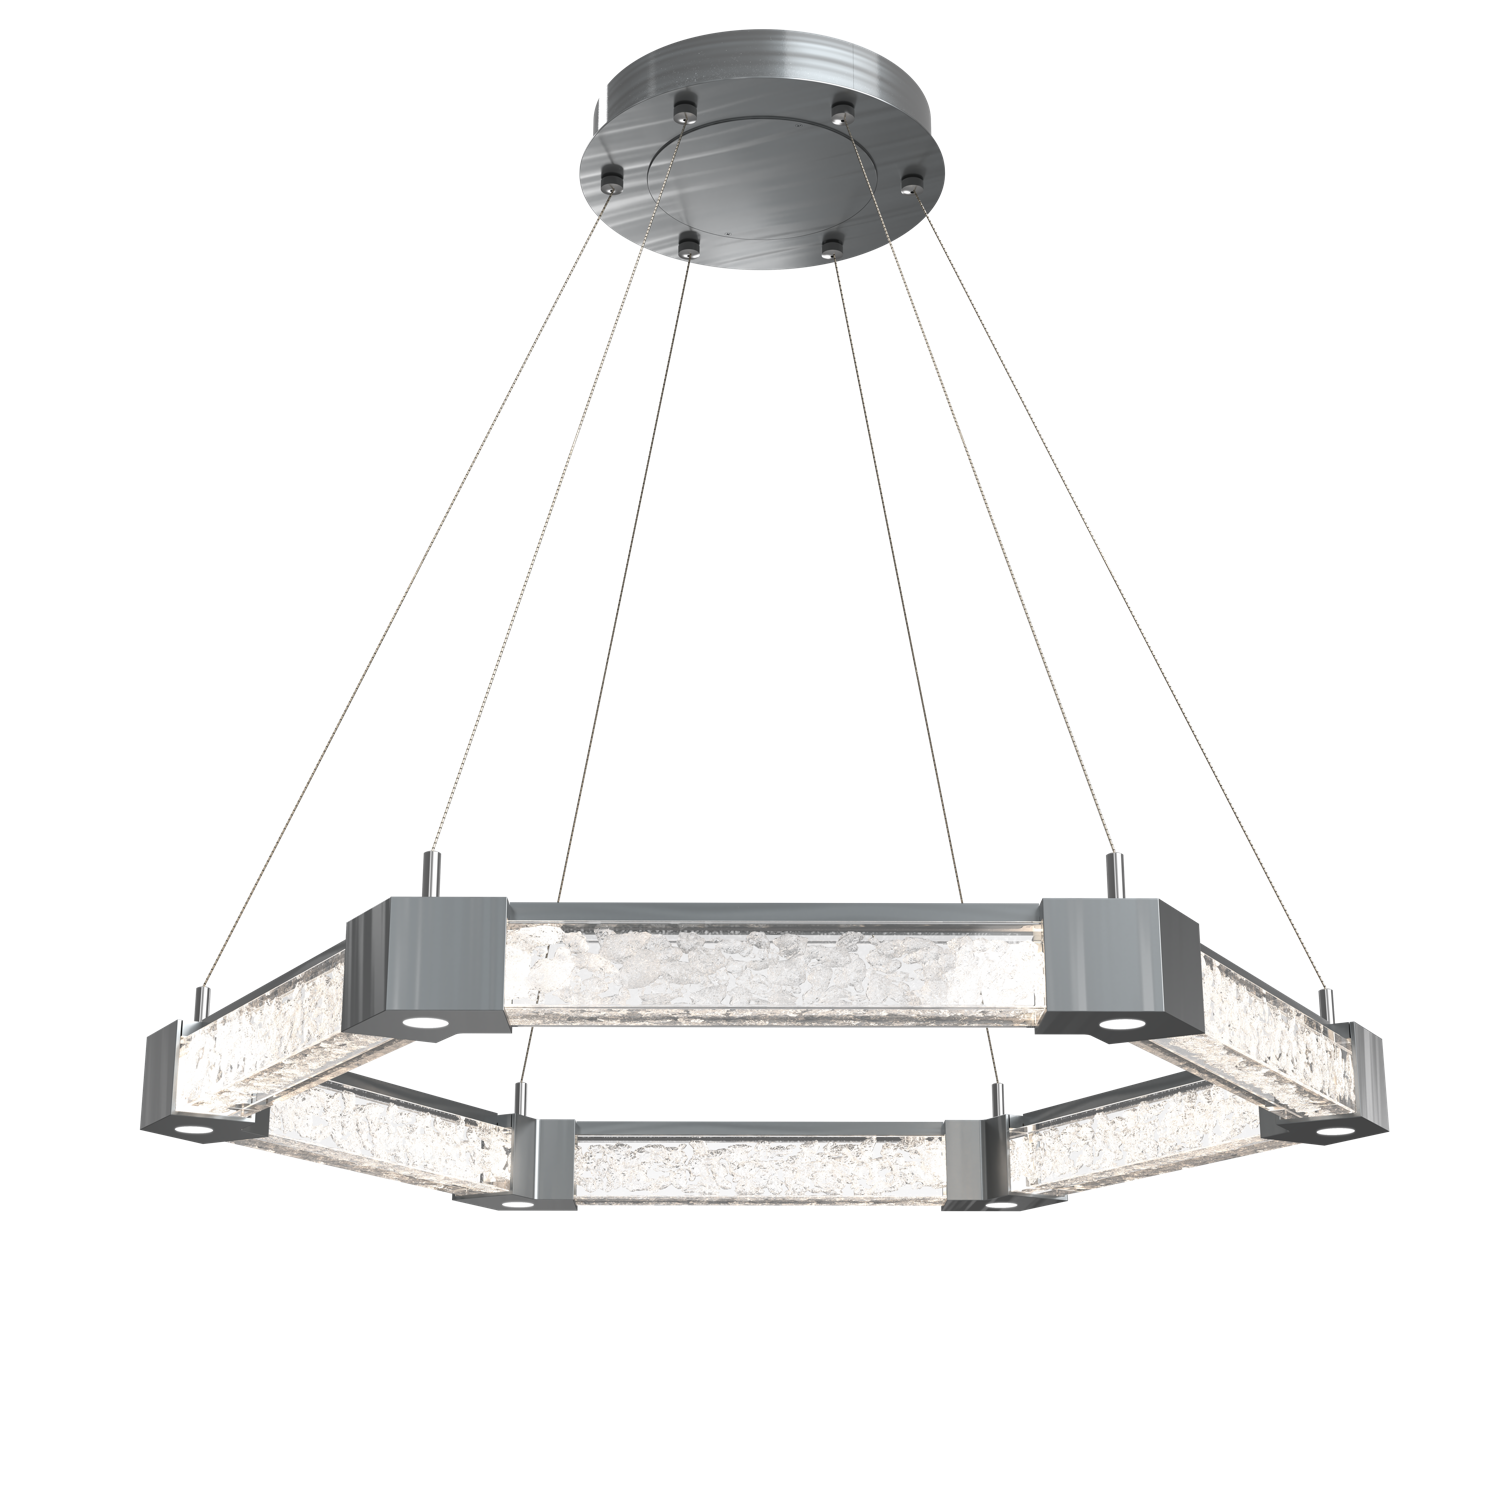 CHB0060-35-SN-GC-Hammerton-Studio-Axis-Hexagonal-Ring-Chandelier-with-Satin-Nickel-finish-and-clear-cast-glass-and-LED-lamping